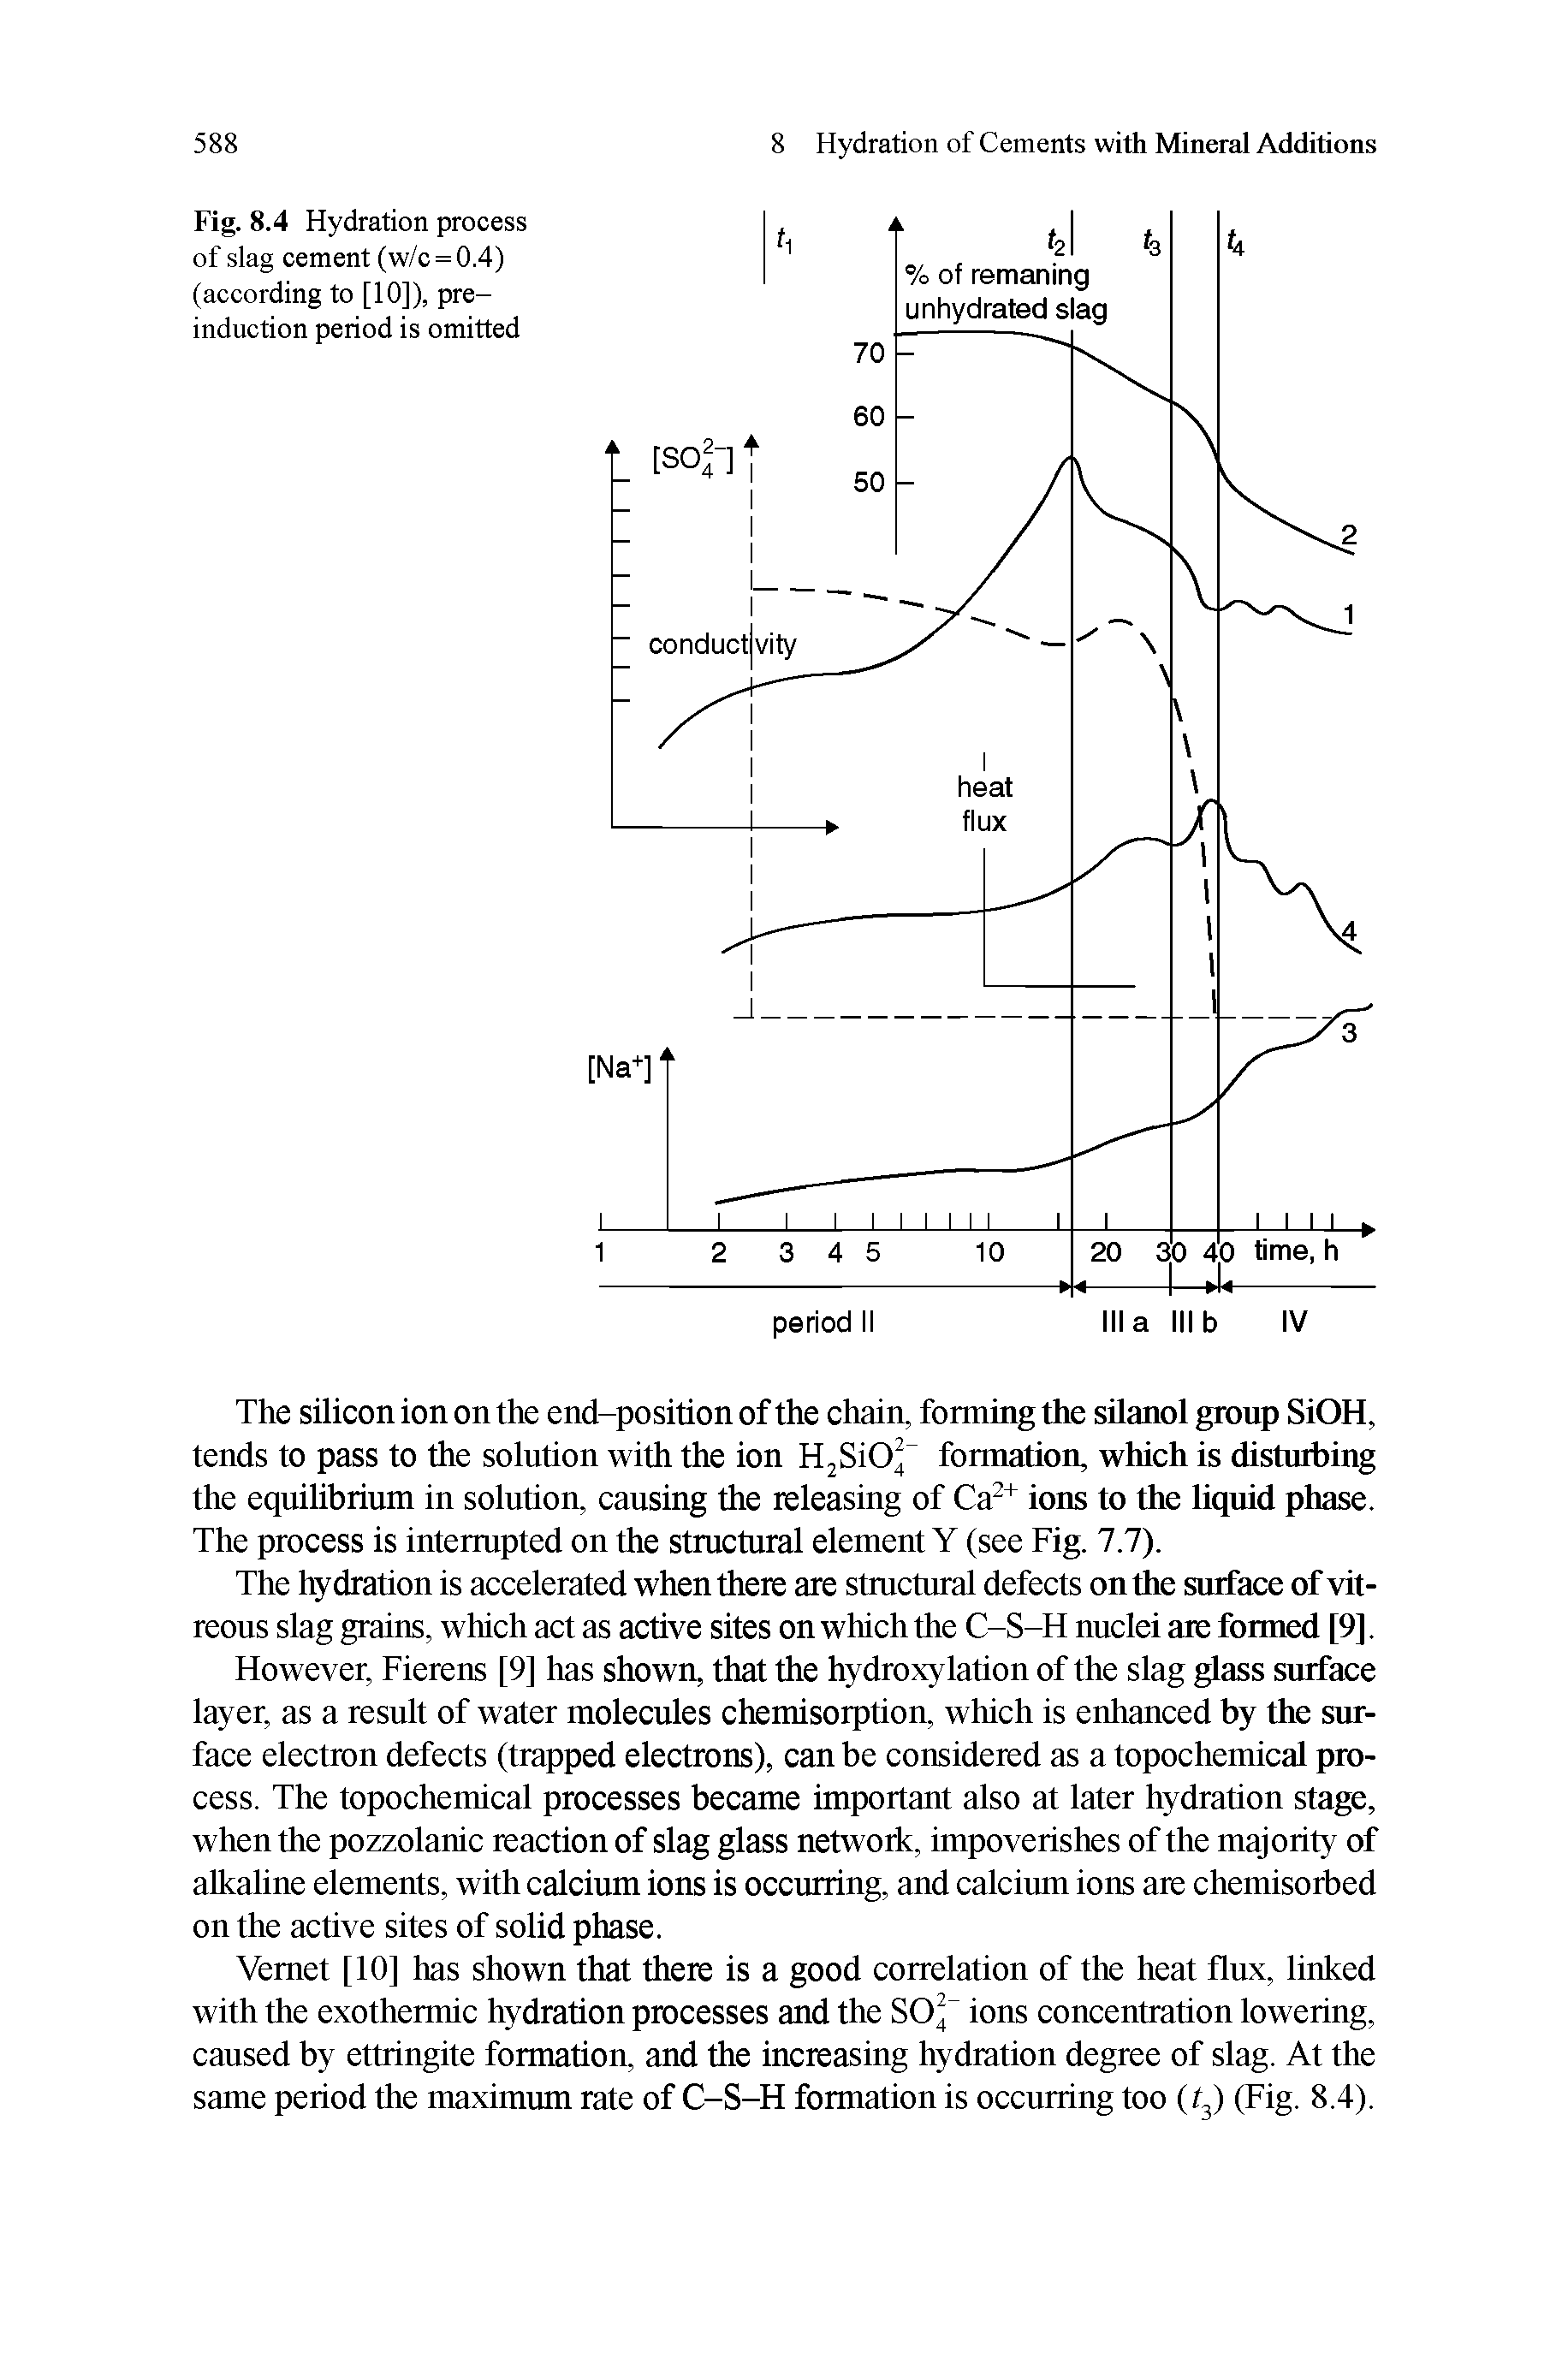 Fig. 8.4 Hydration process of slag cement (w/e = 0.4) (according to [10]), preinduction period is omitted...